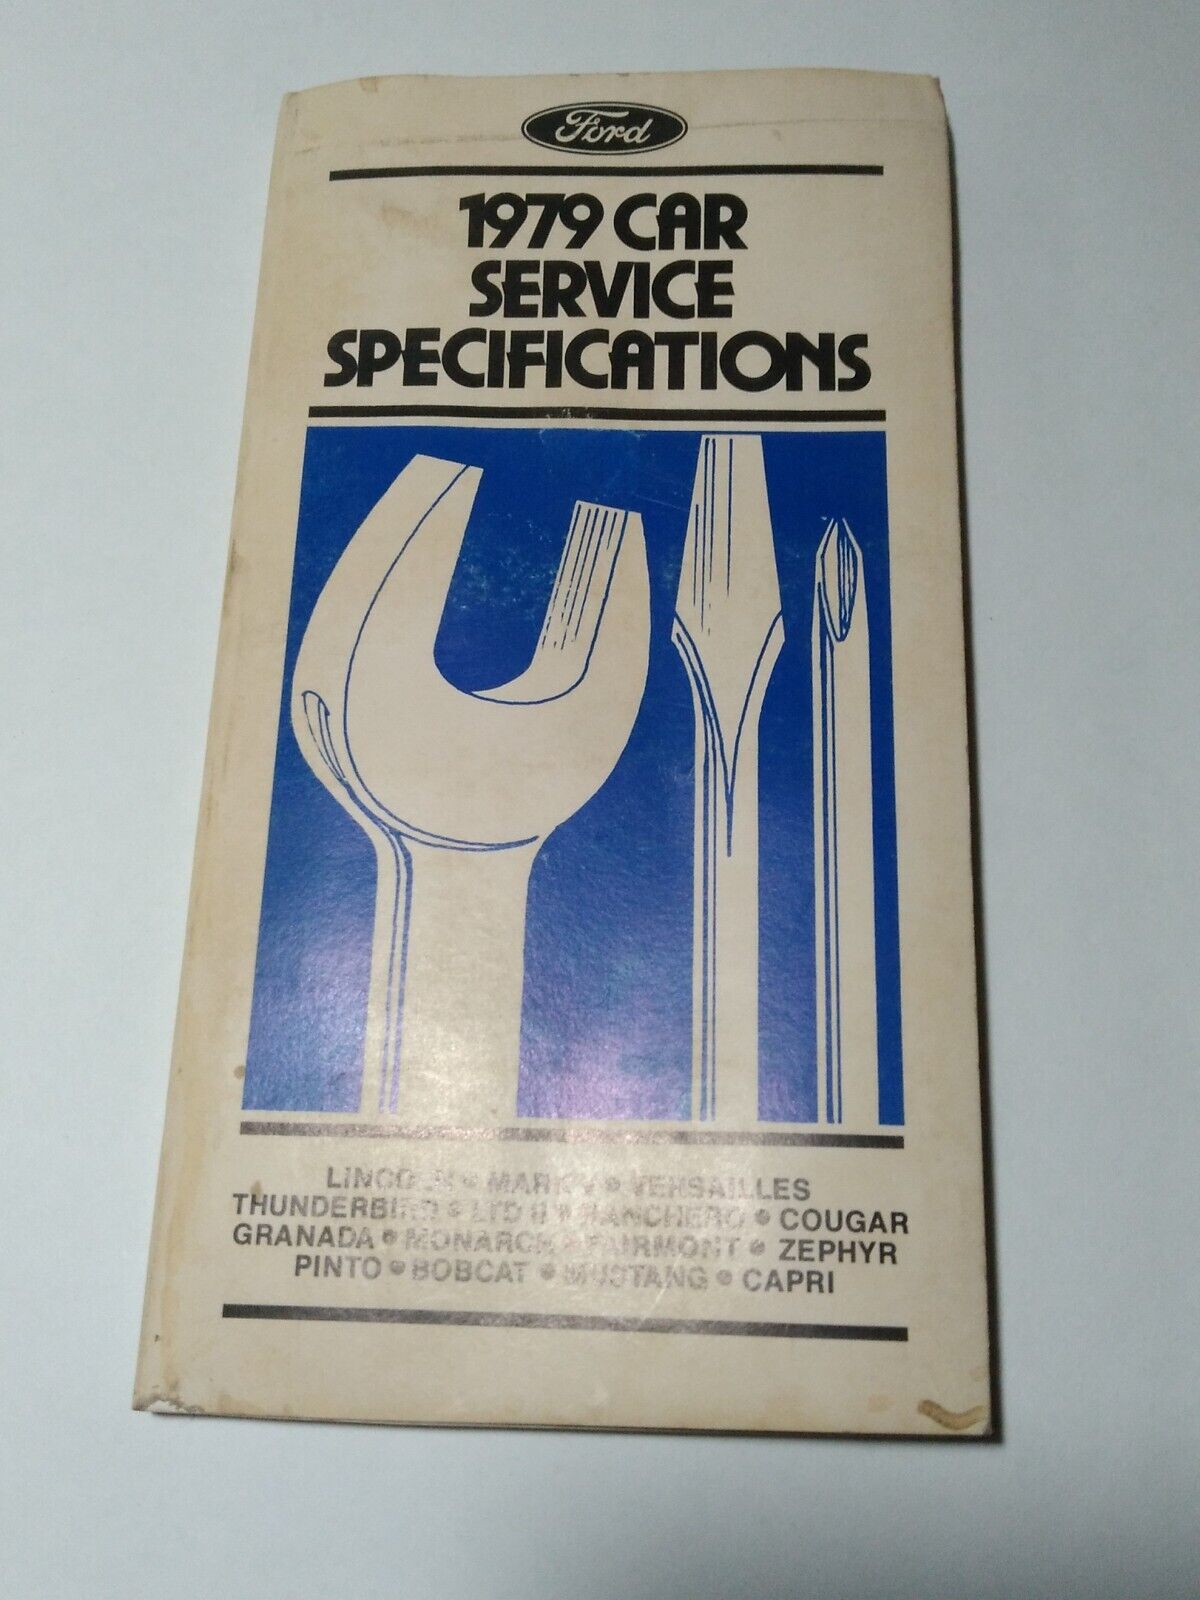 Vintage 1979 Ford Car Service Specifications Booklet